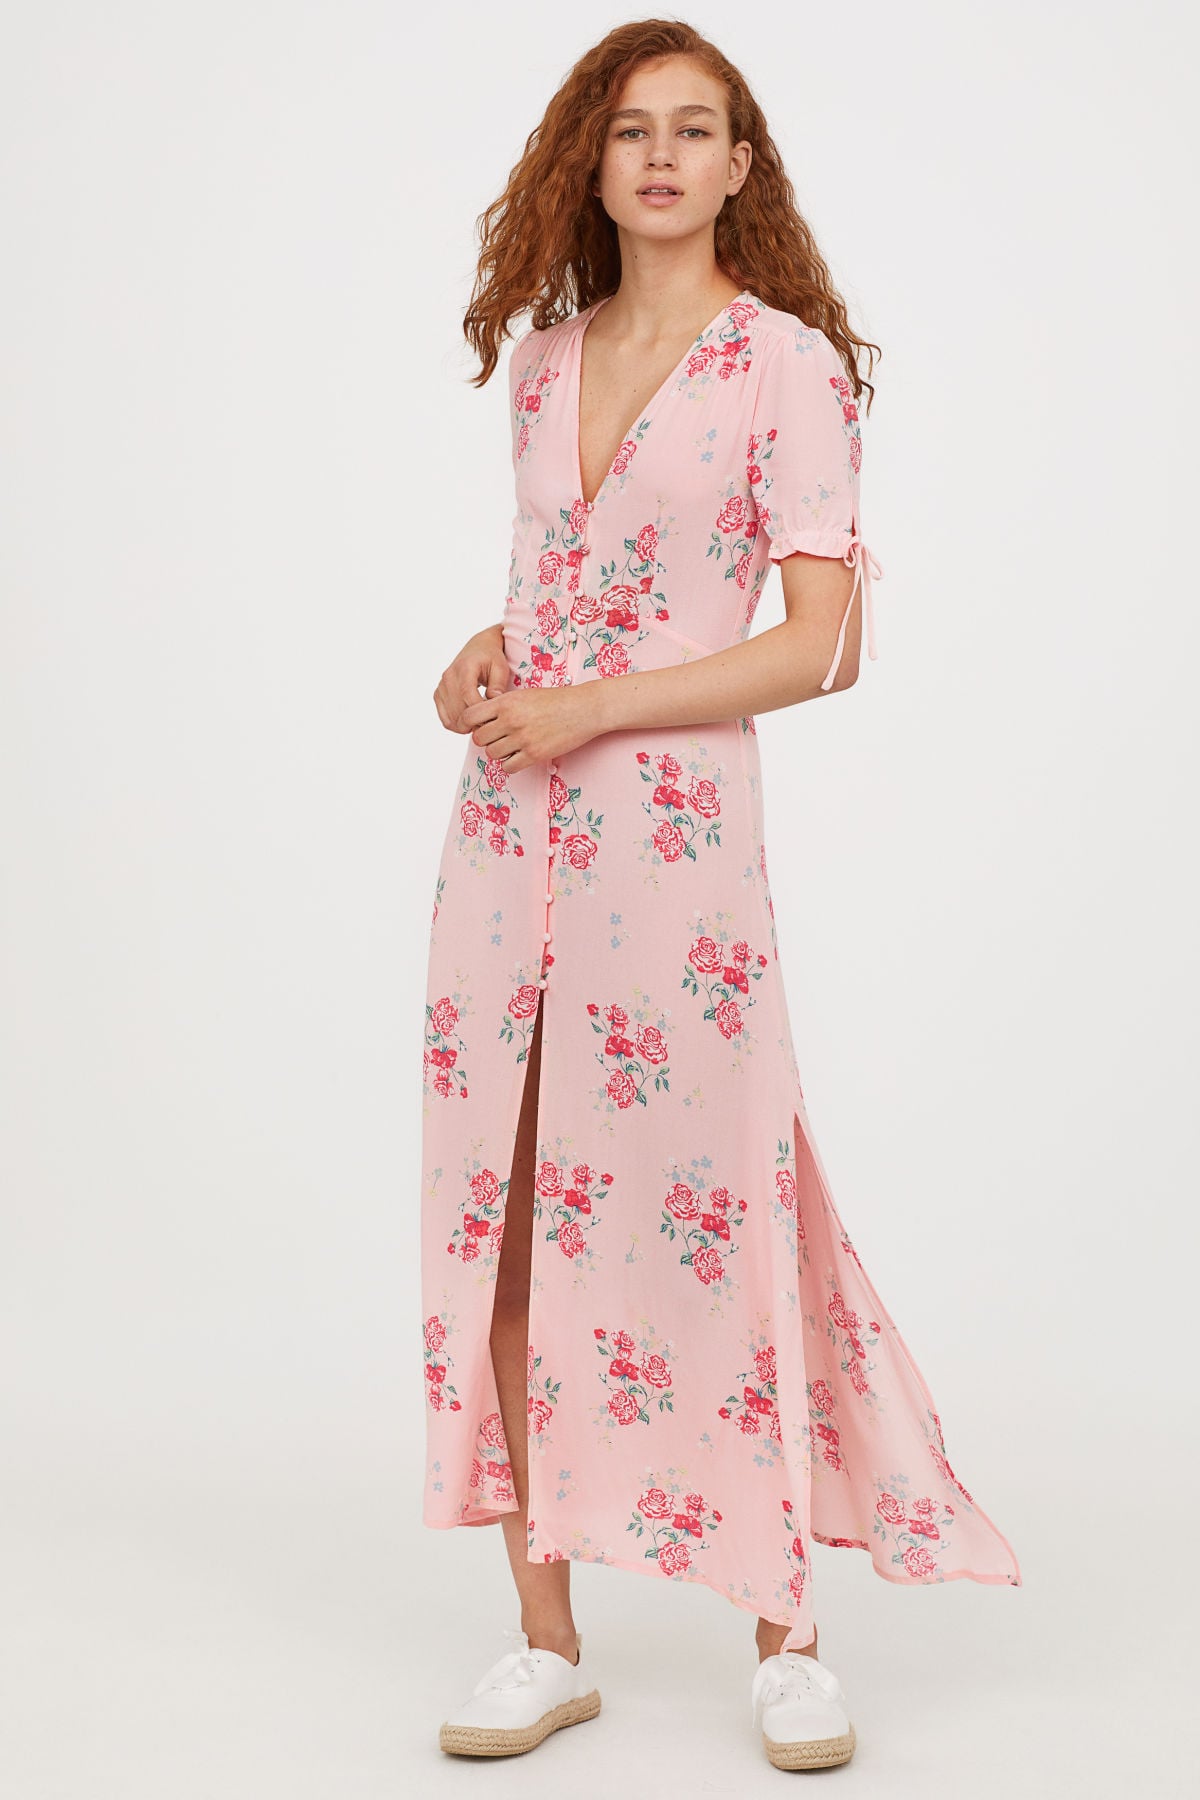 The Best Spring Dresses From H&M